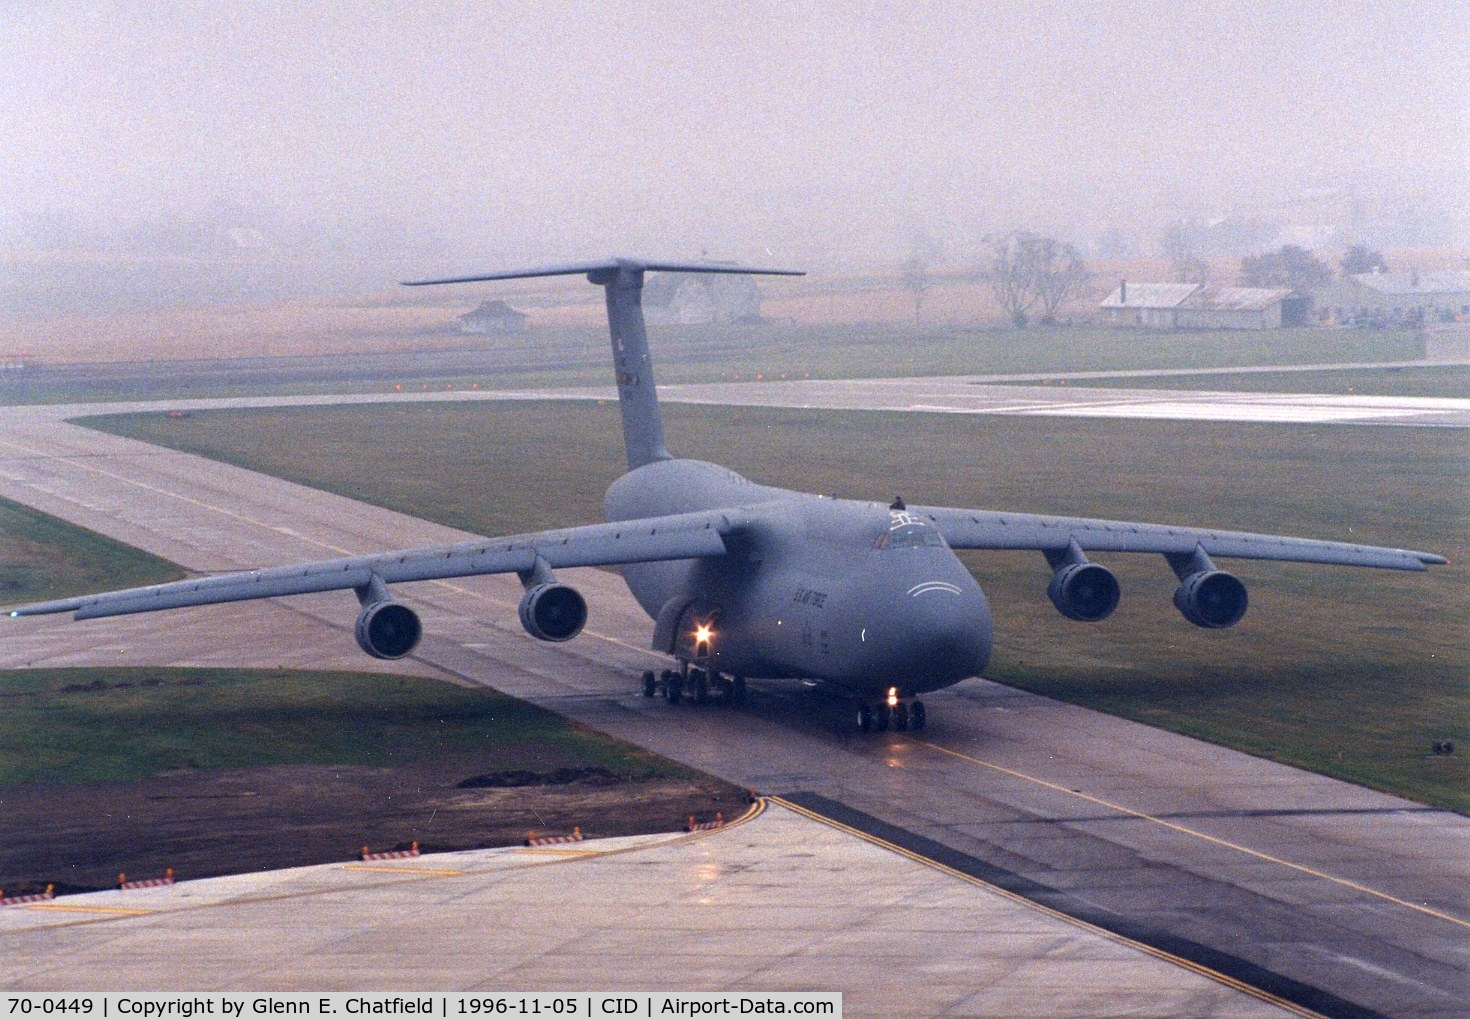 70-0449, 1970 Lockheed C-5A Galaxy C/N 500-0063, C-5A taxiing to the cargo ramp by the control tower